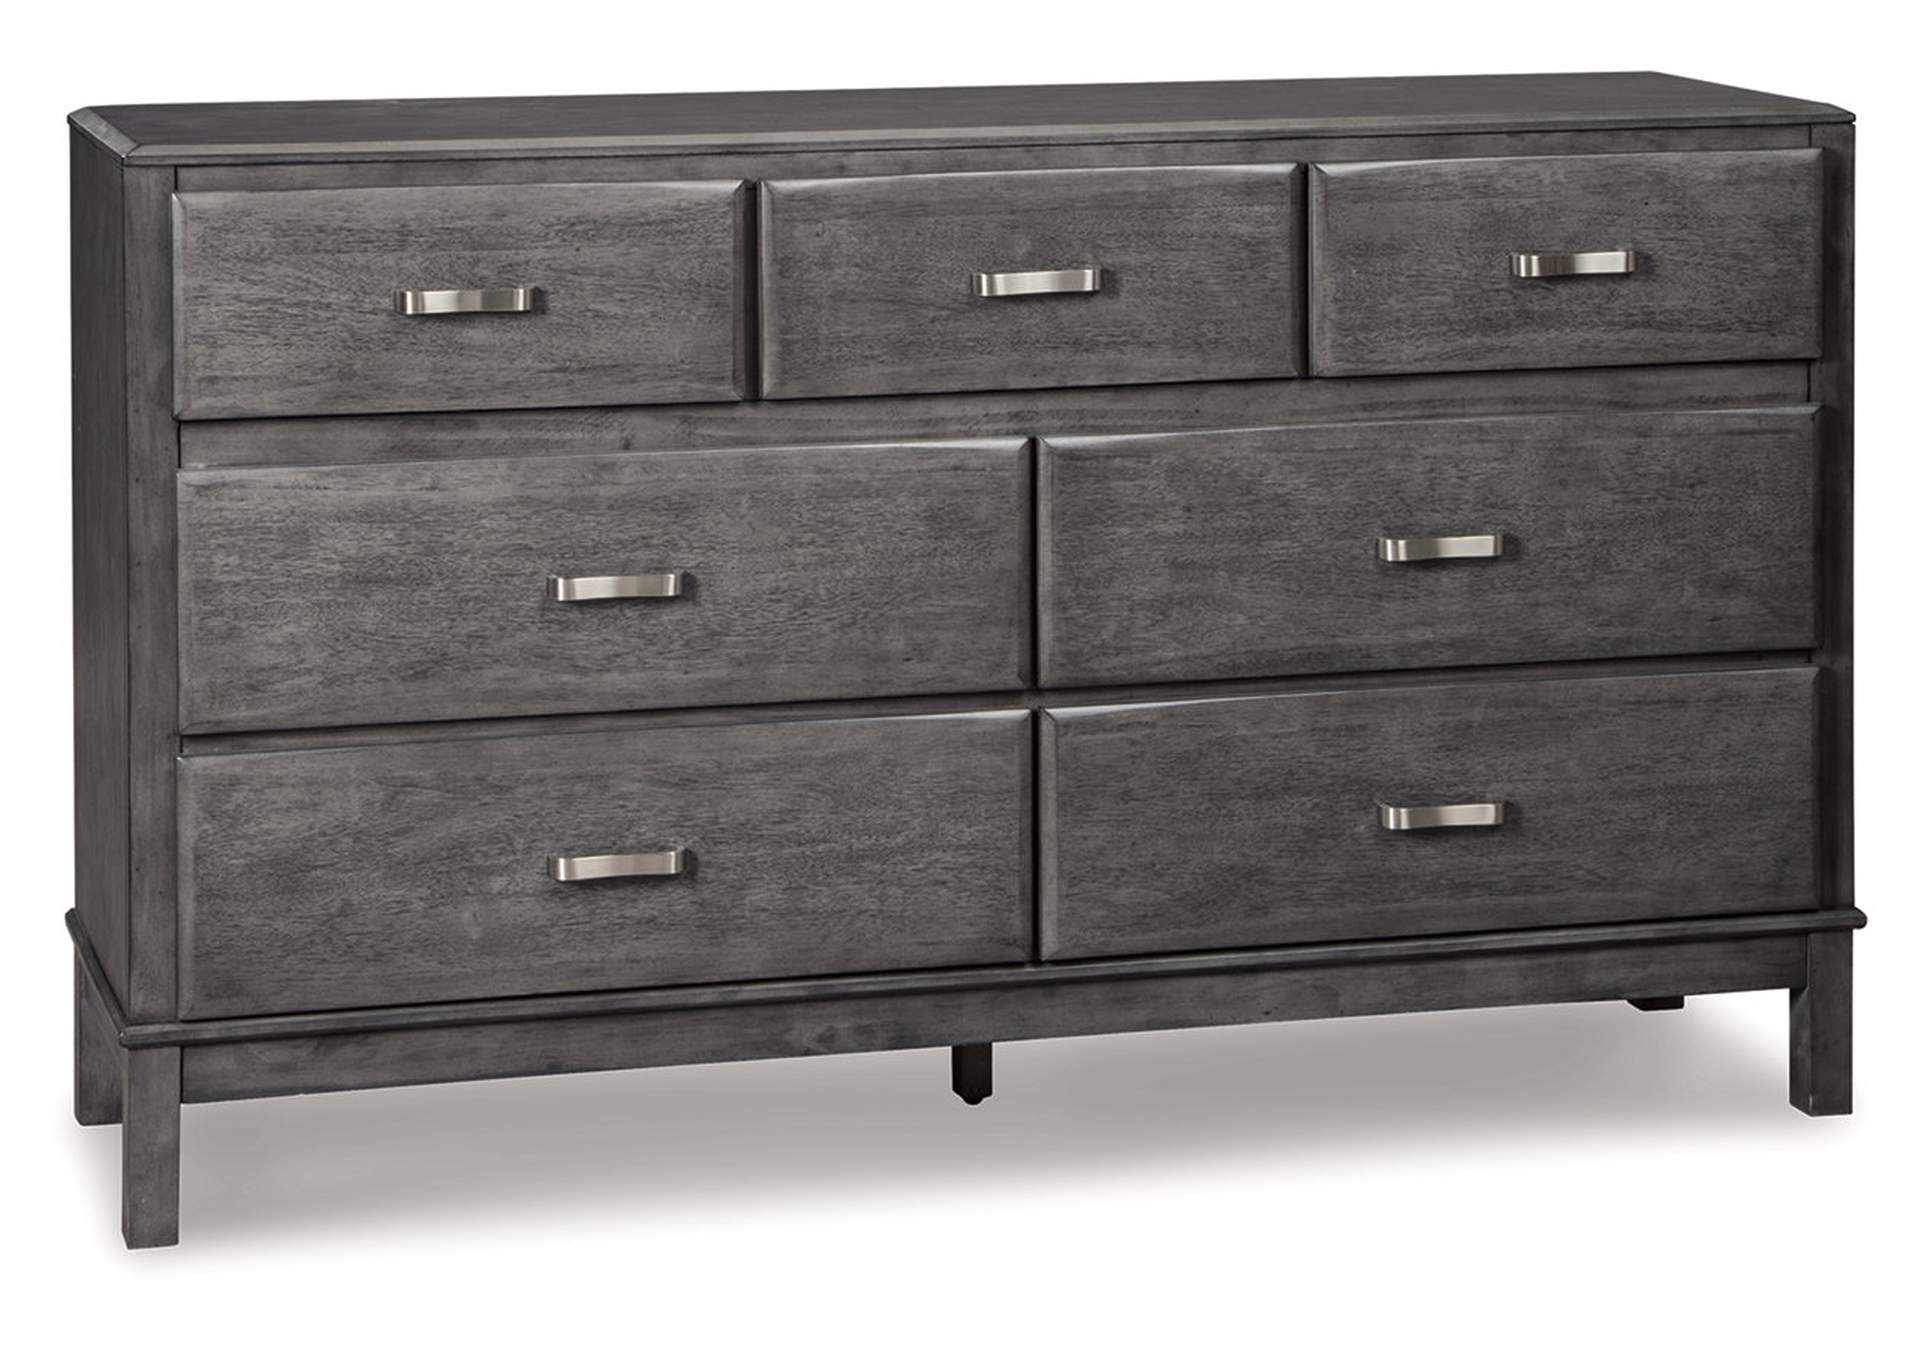 Caitbrook King Storage Bed, Dresser and Nightstand,Signature Design By Ashley